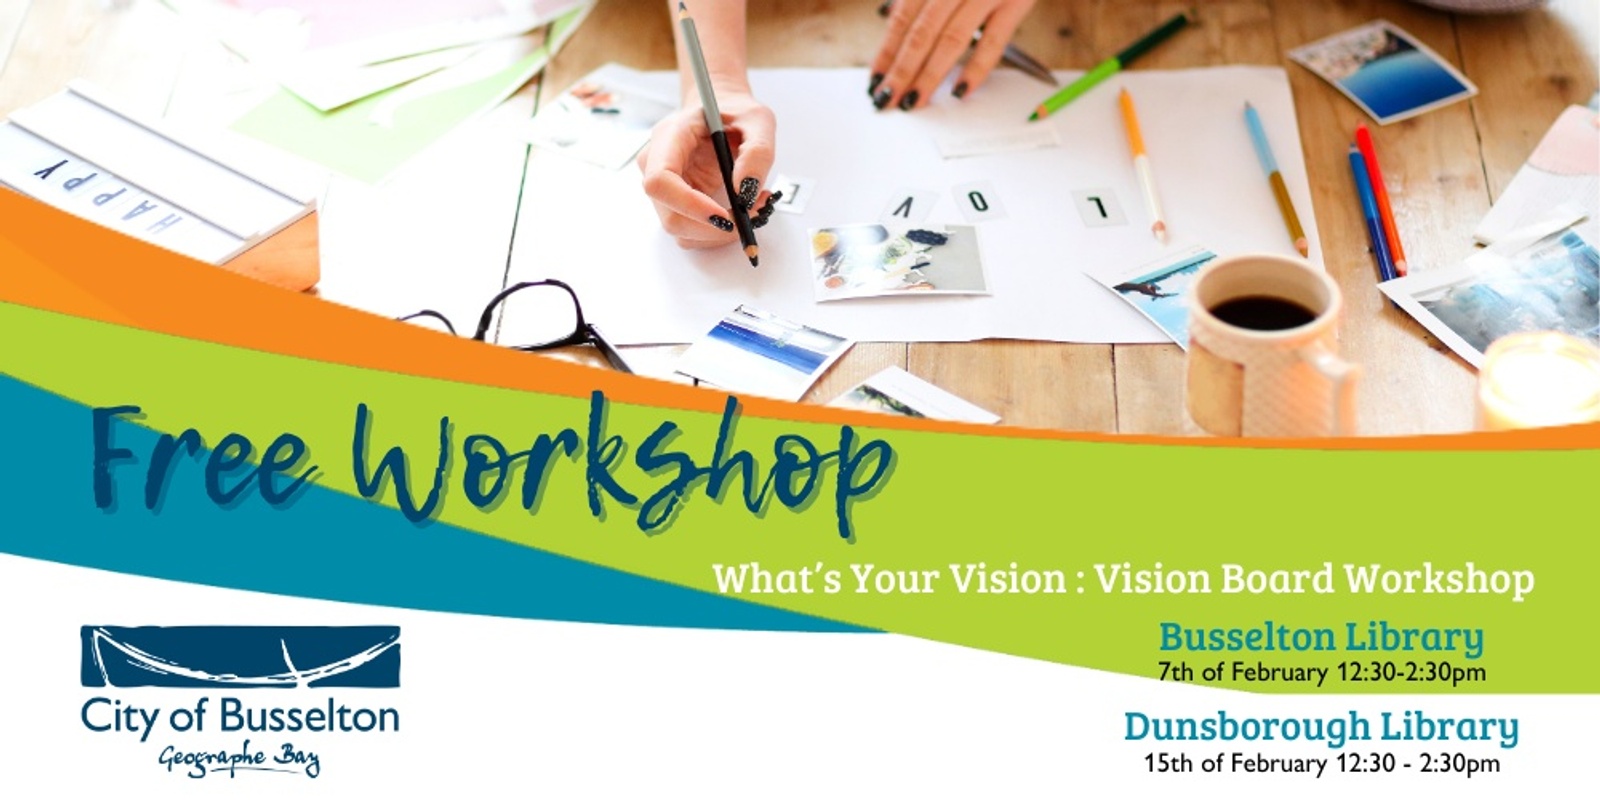 What's Your Vision: vision board workshop - Busselton. | Humanitix